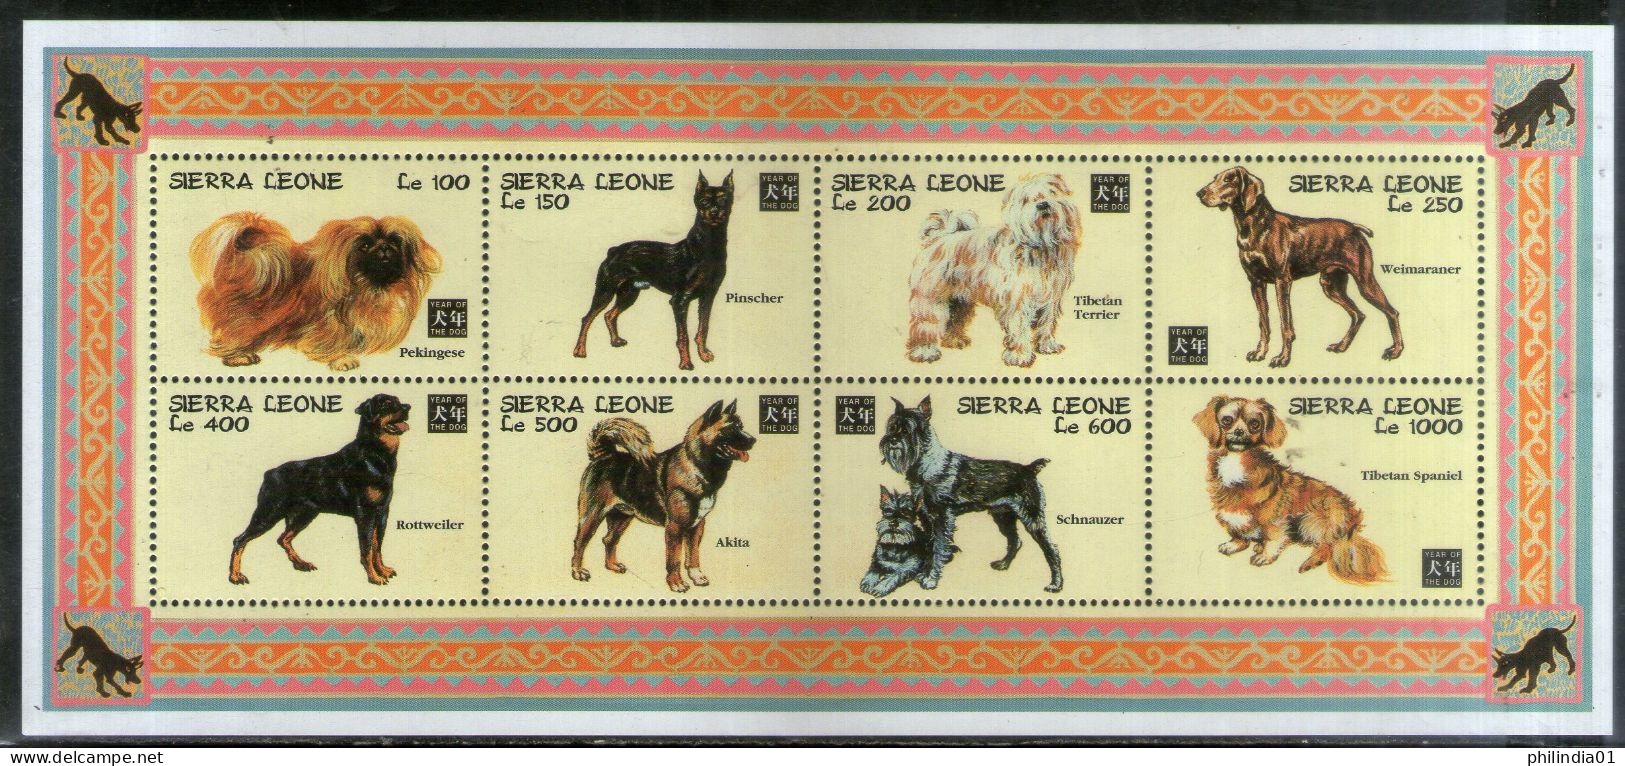 Sierra Leone 1994 Chinese New Year Dogs Animals Sc 1717 Sheetlet MNH # 6330 - Perros